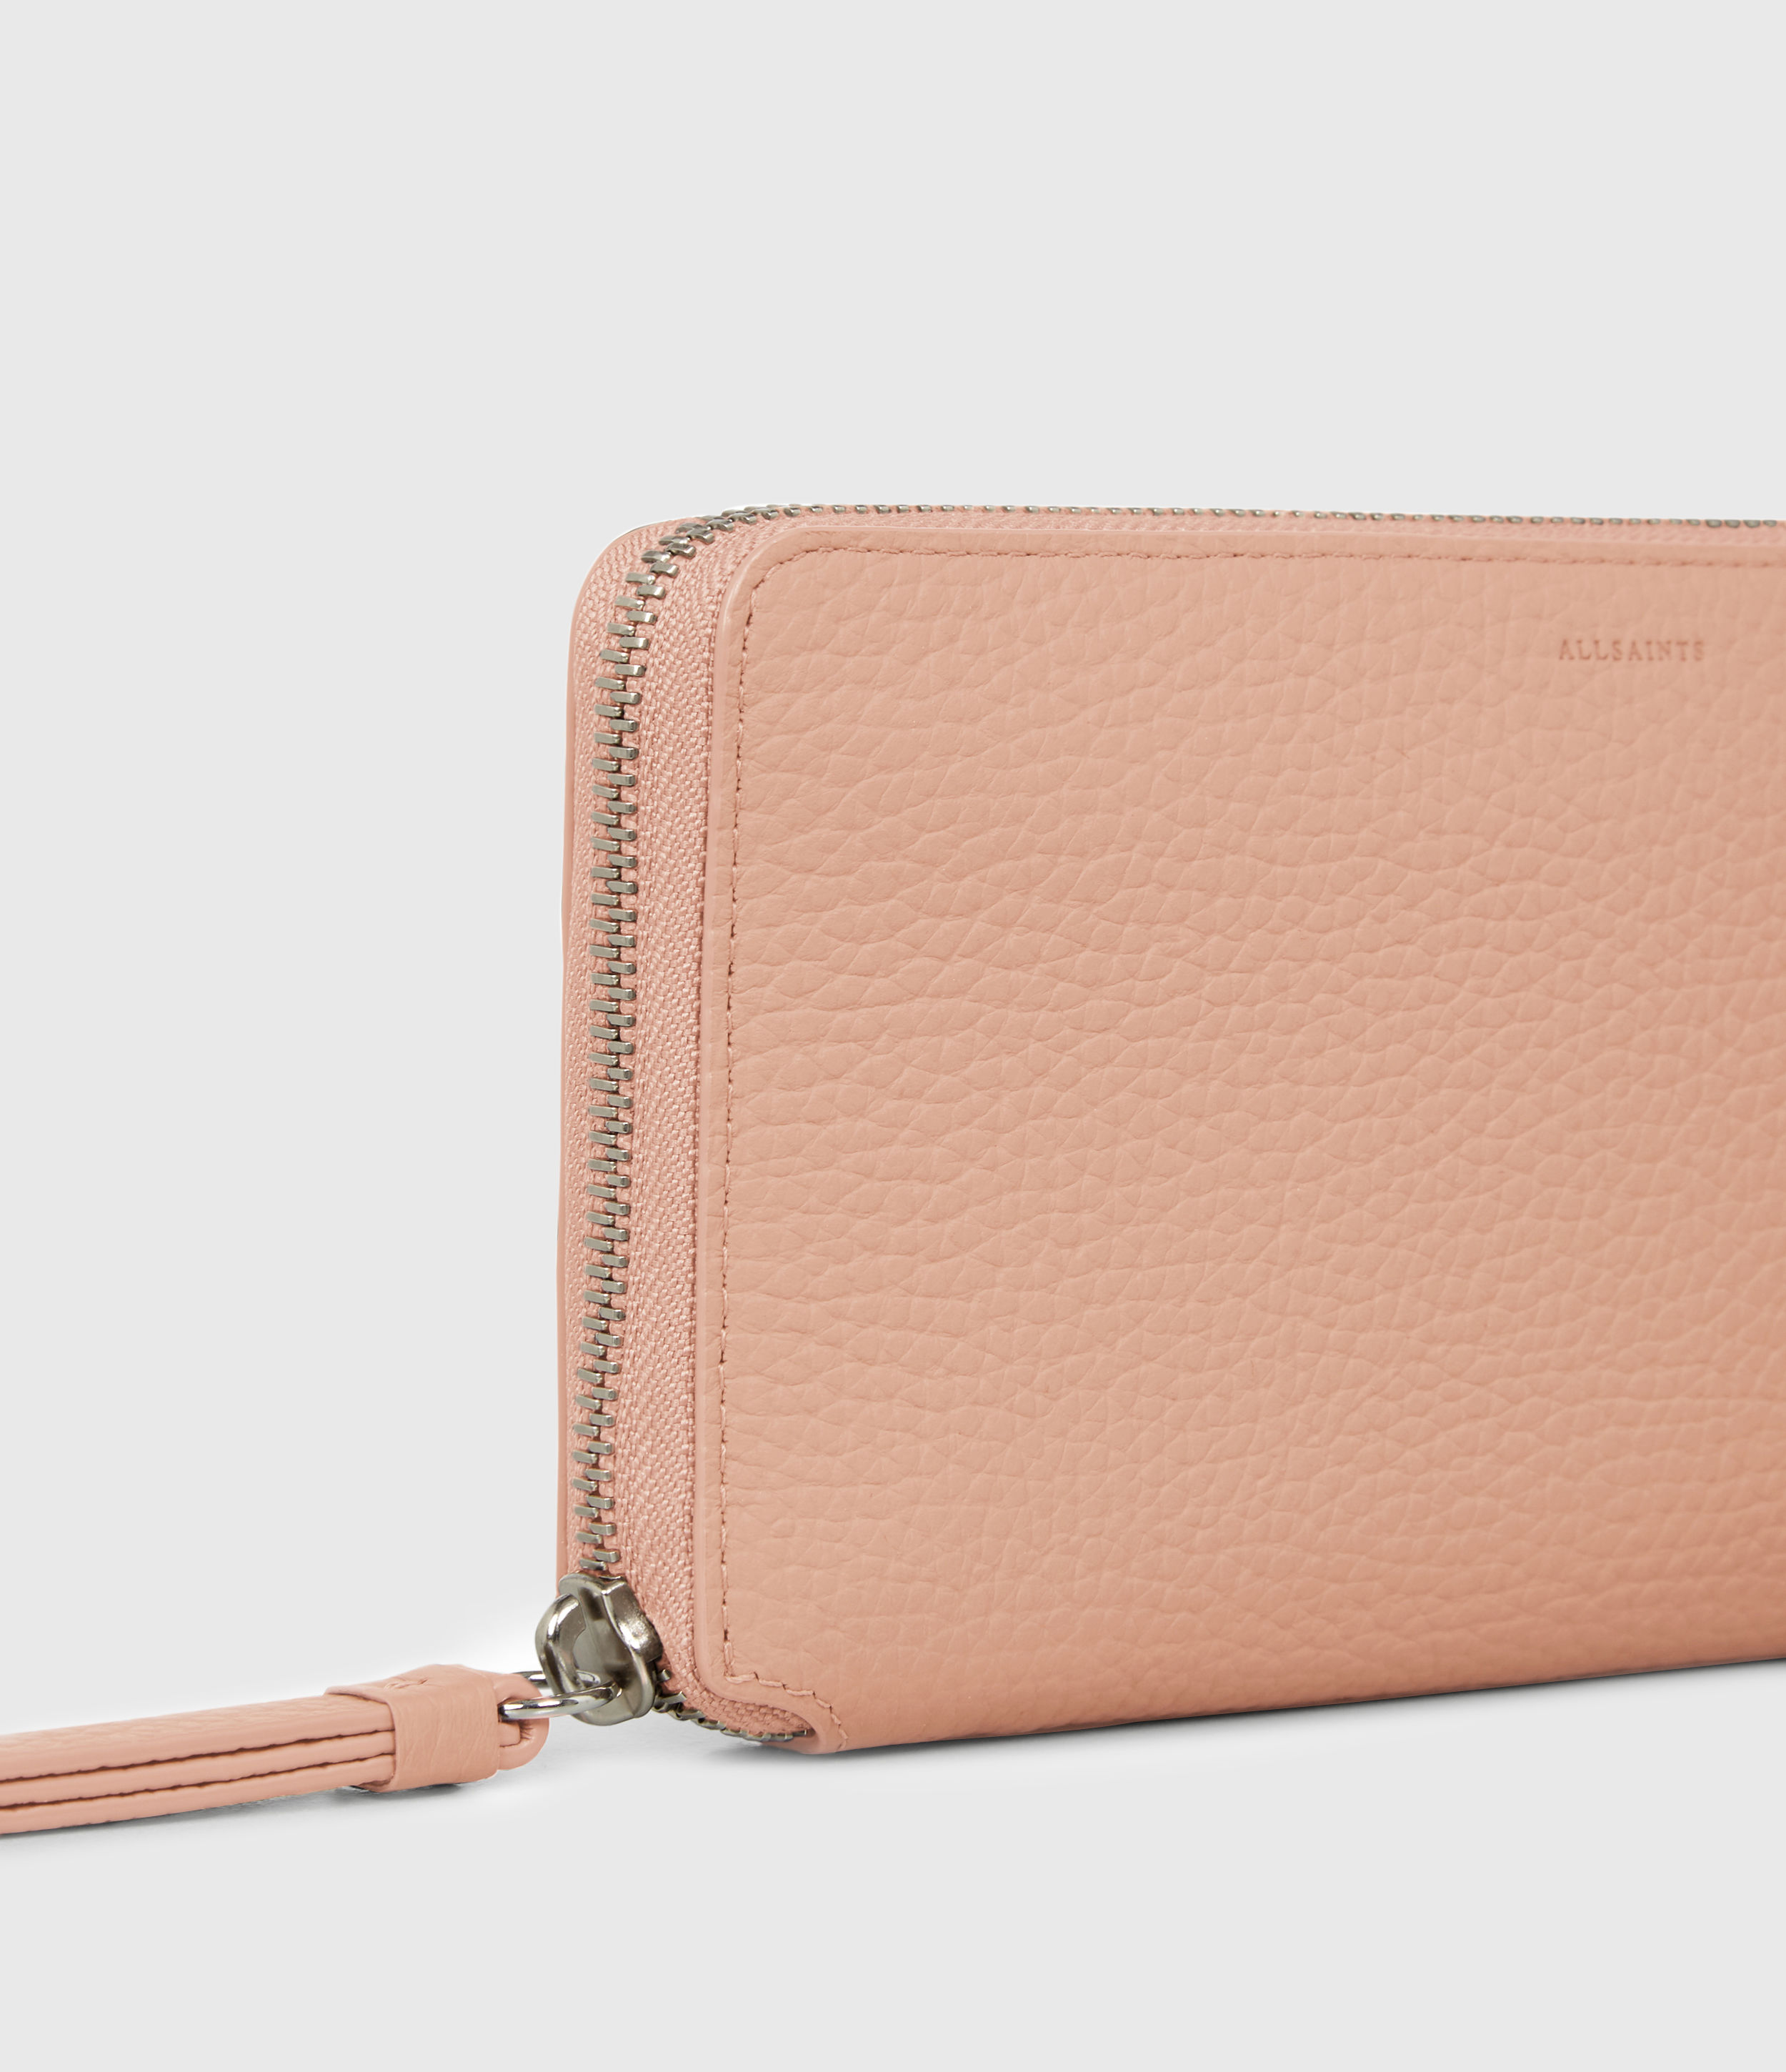 Allsaints Fetch Phone Leather Wristlet In Nude Pink